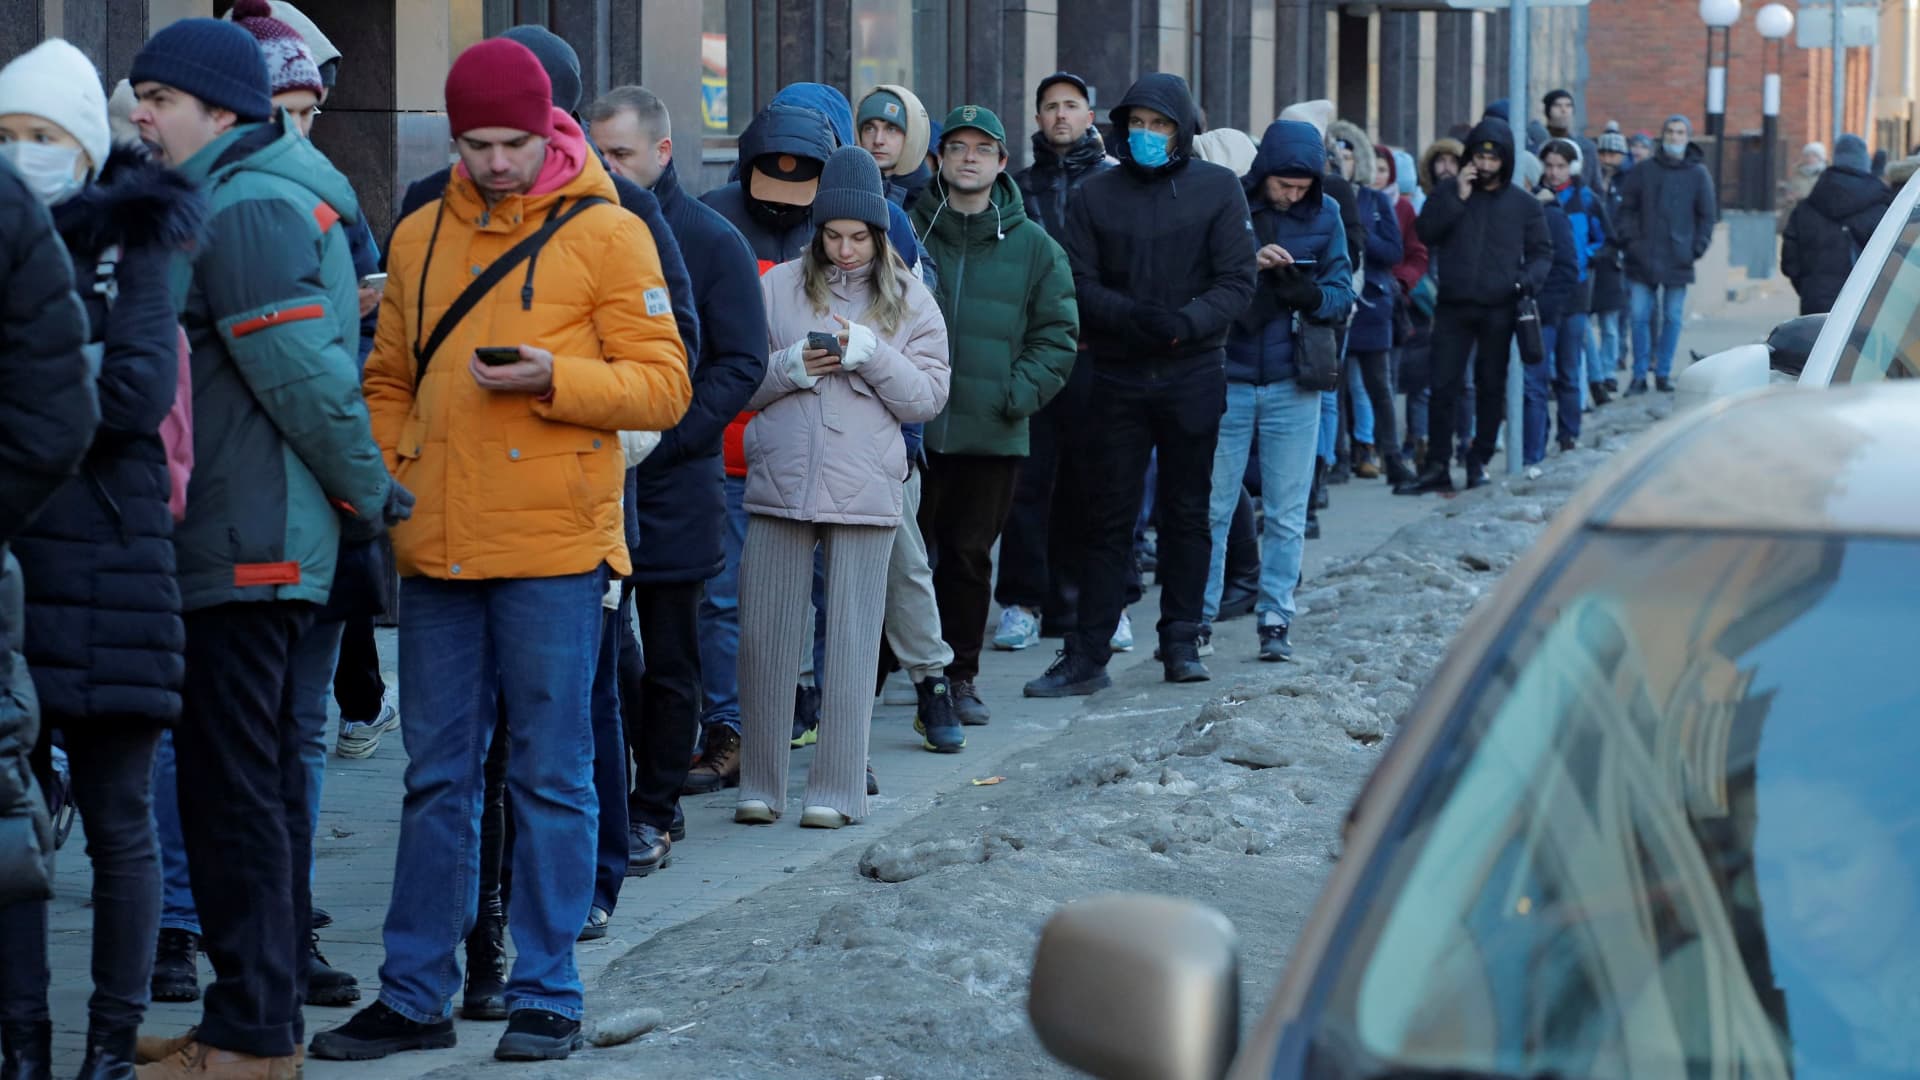 People stand in line to use an ATM money machine in Saint Petersburg, Russia February 27, 2022.